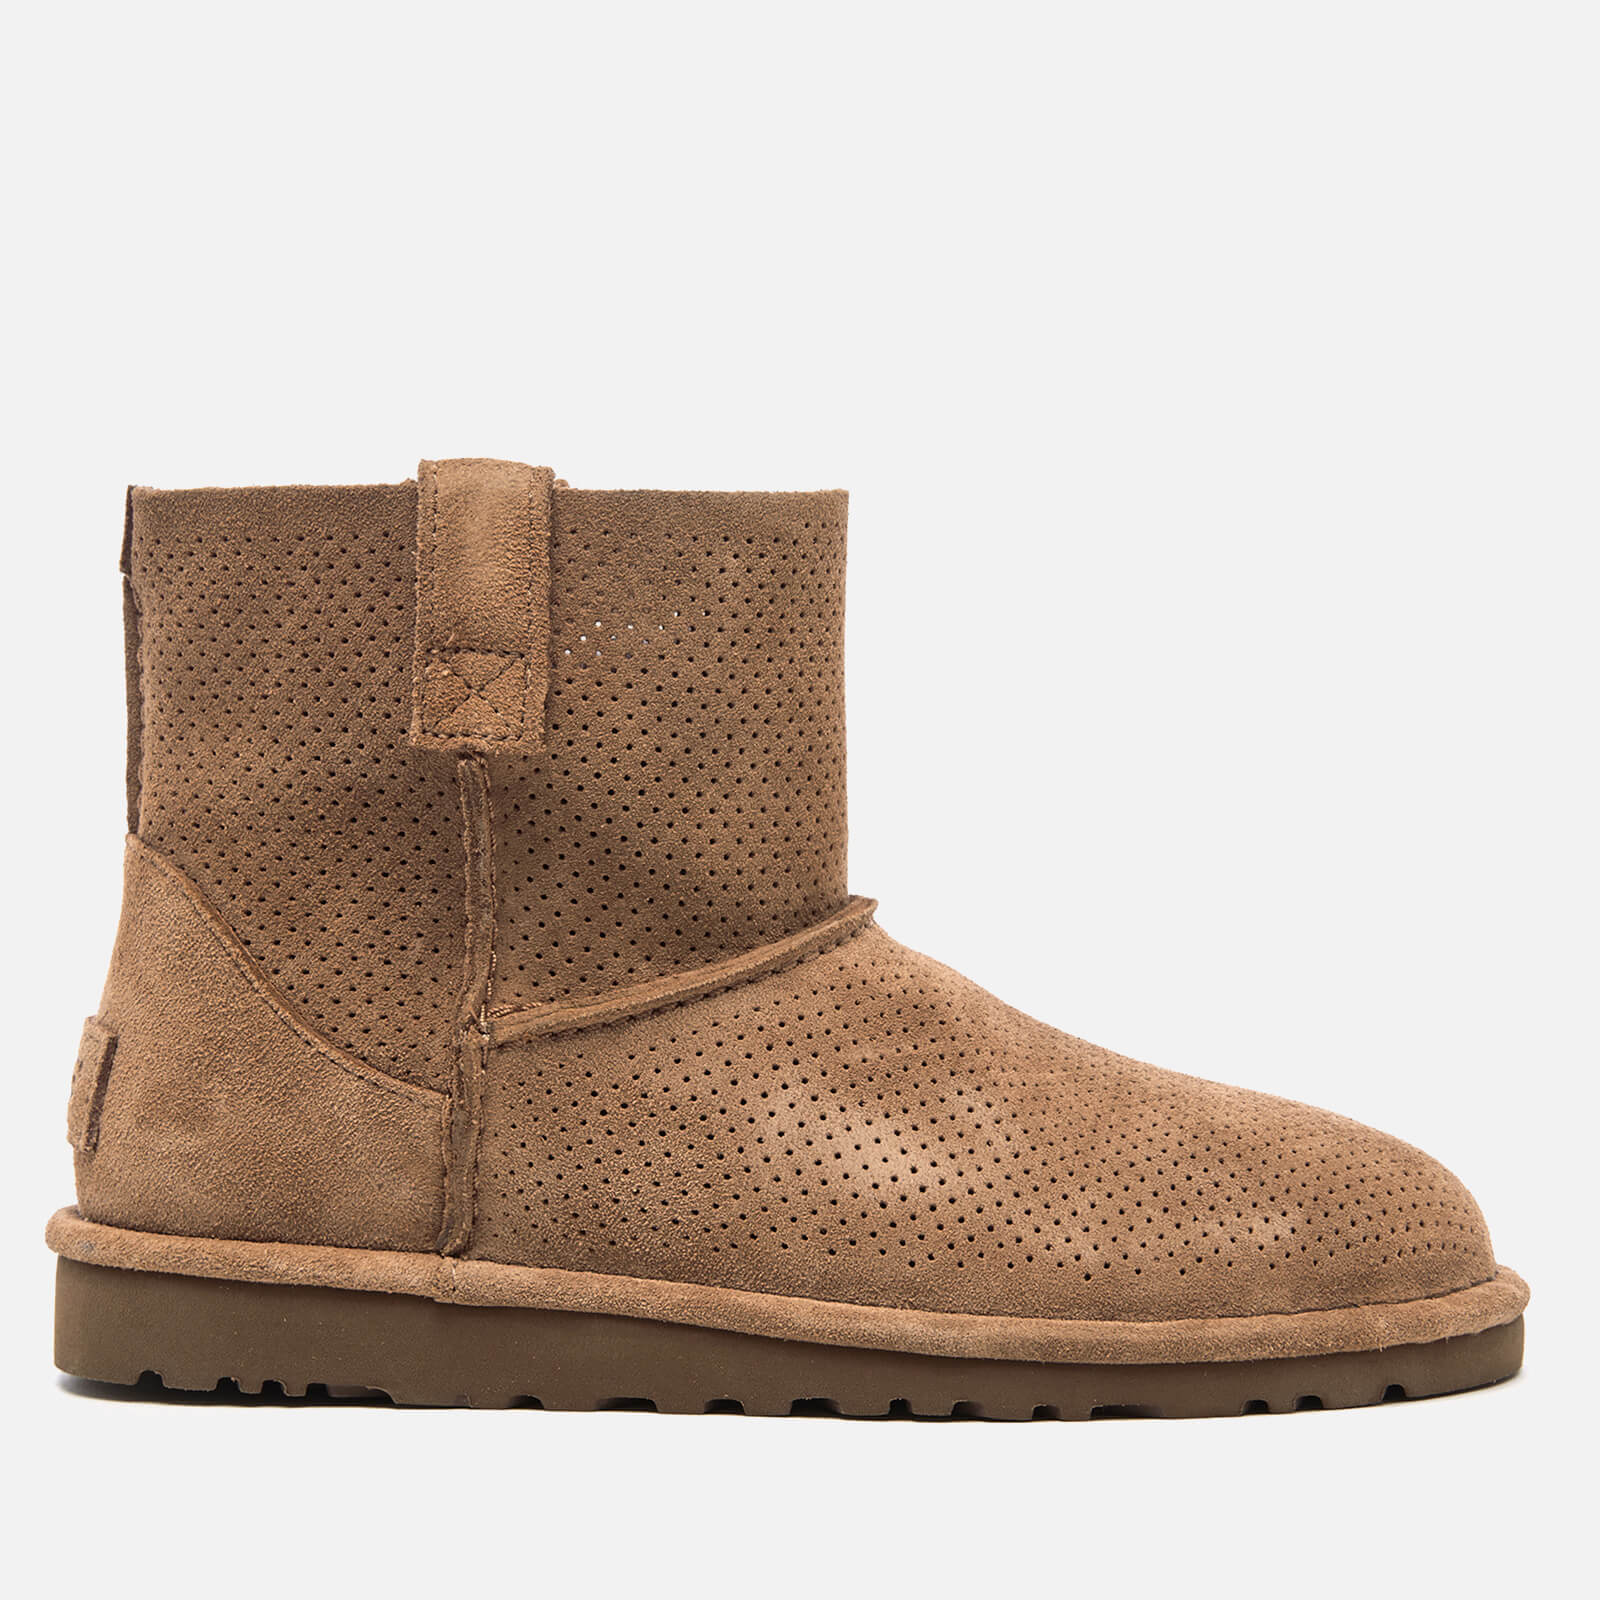 perforated uggs - dsvdedommel 